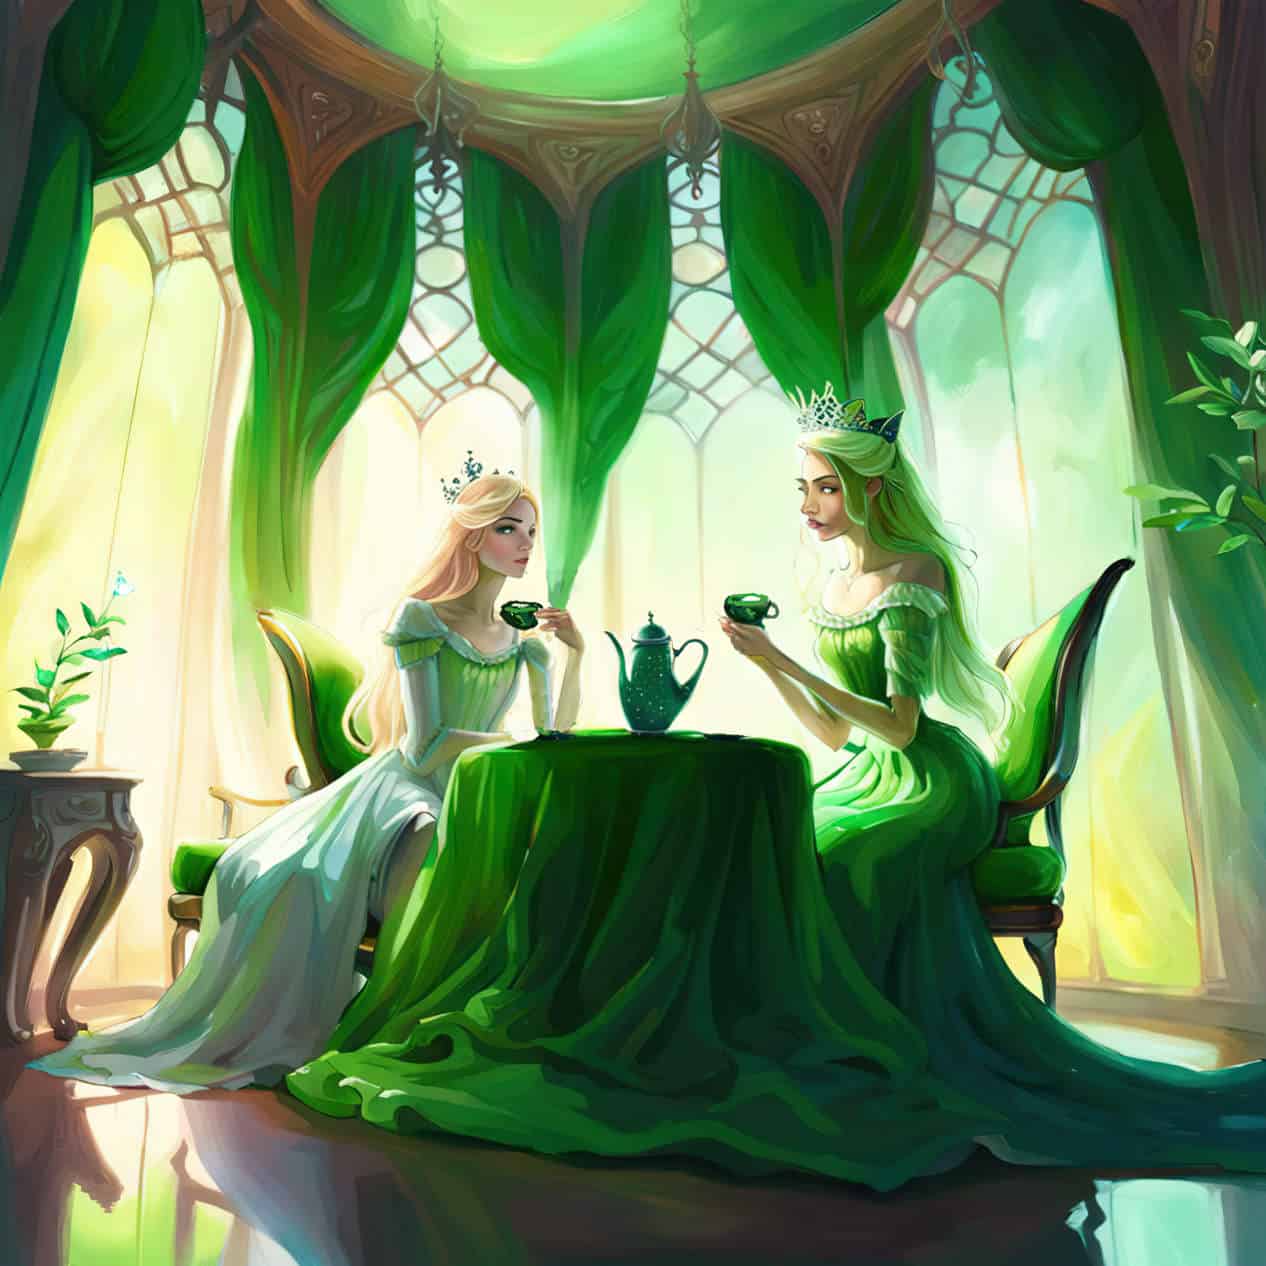 The F–k Princess: A Fractured Fairytale (The Frog Princess)